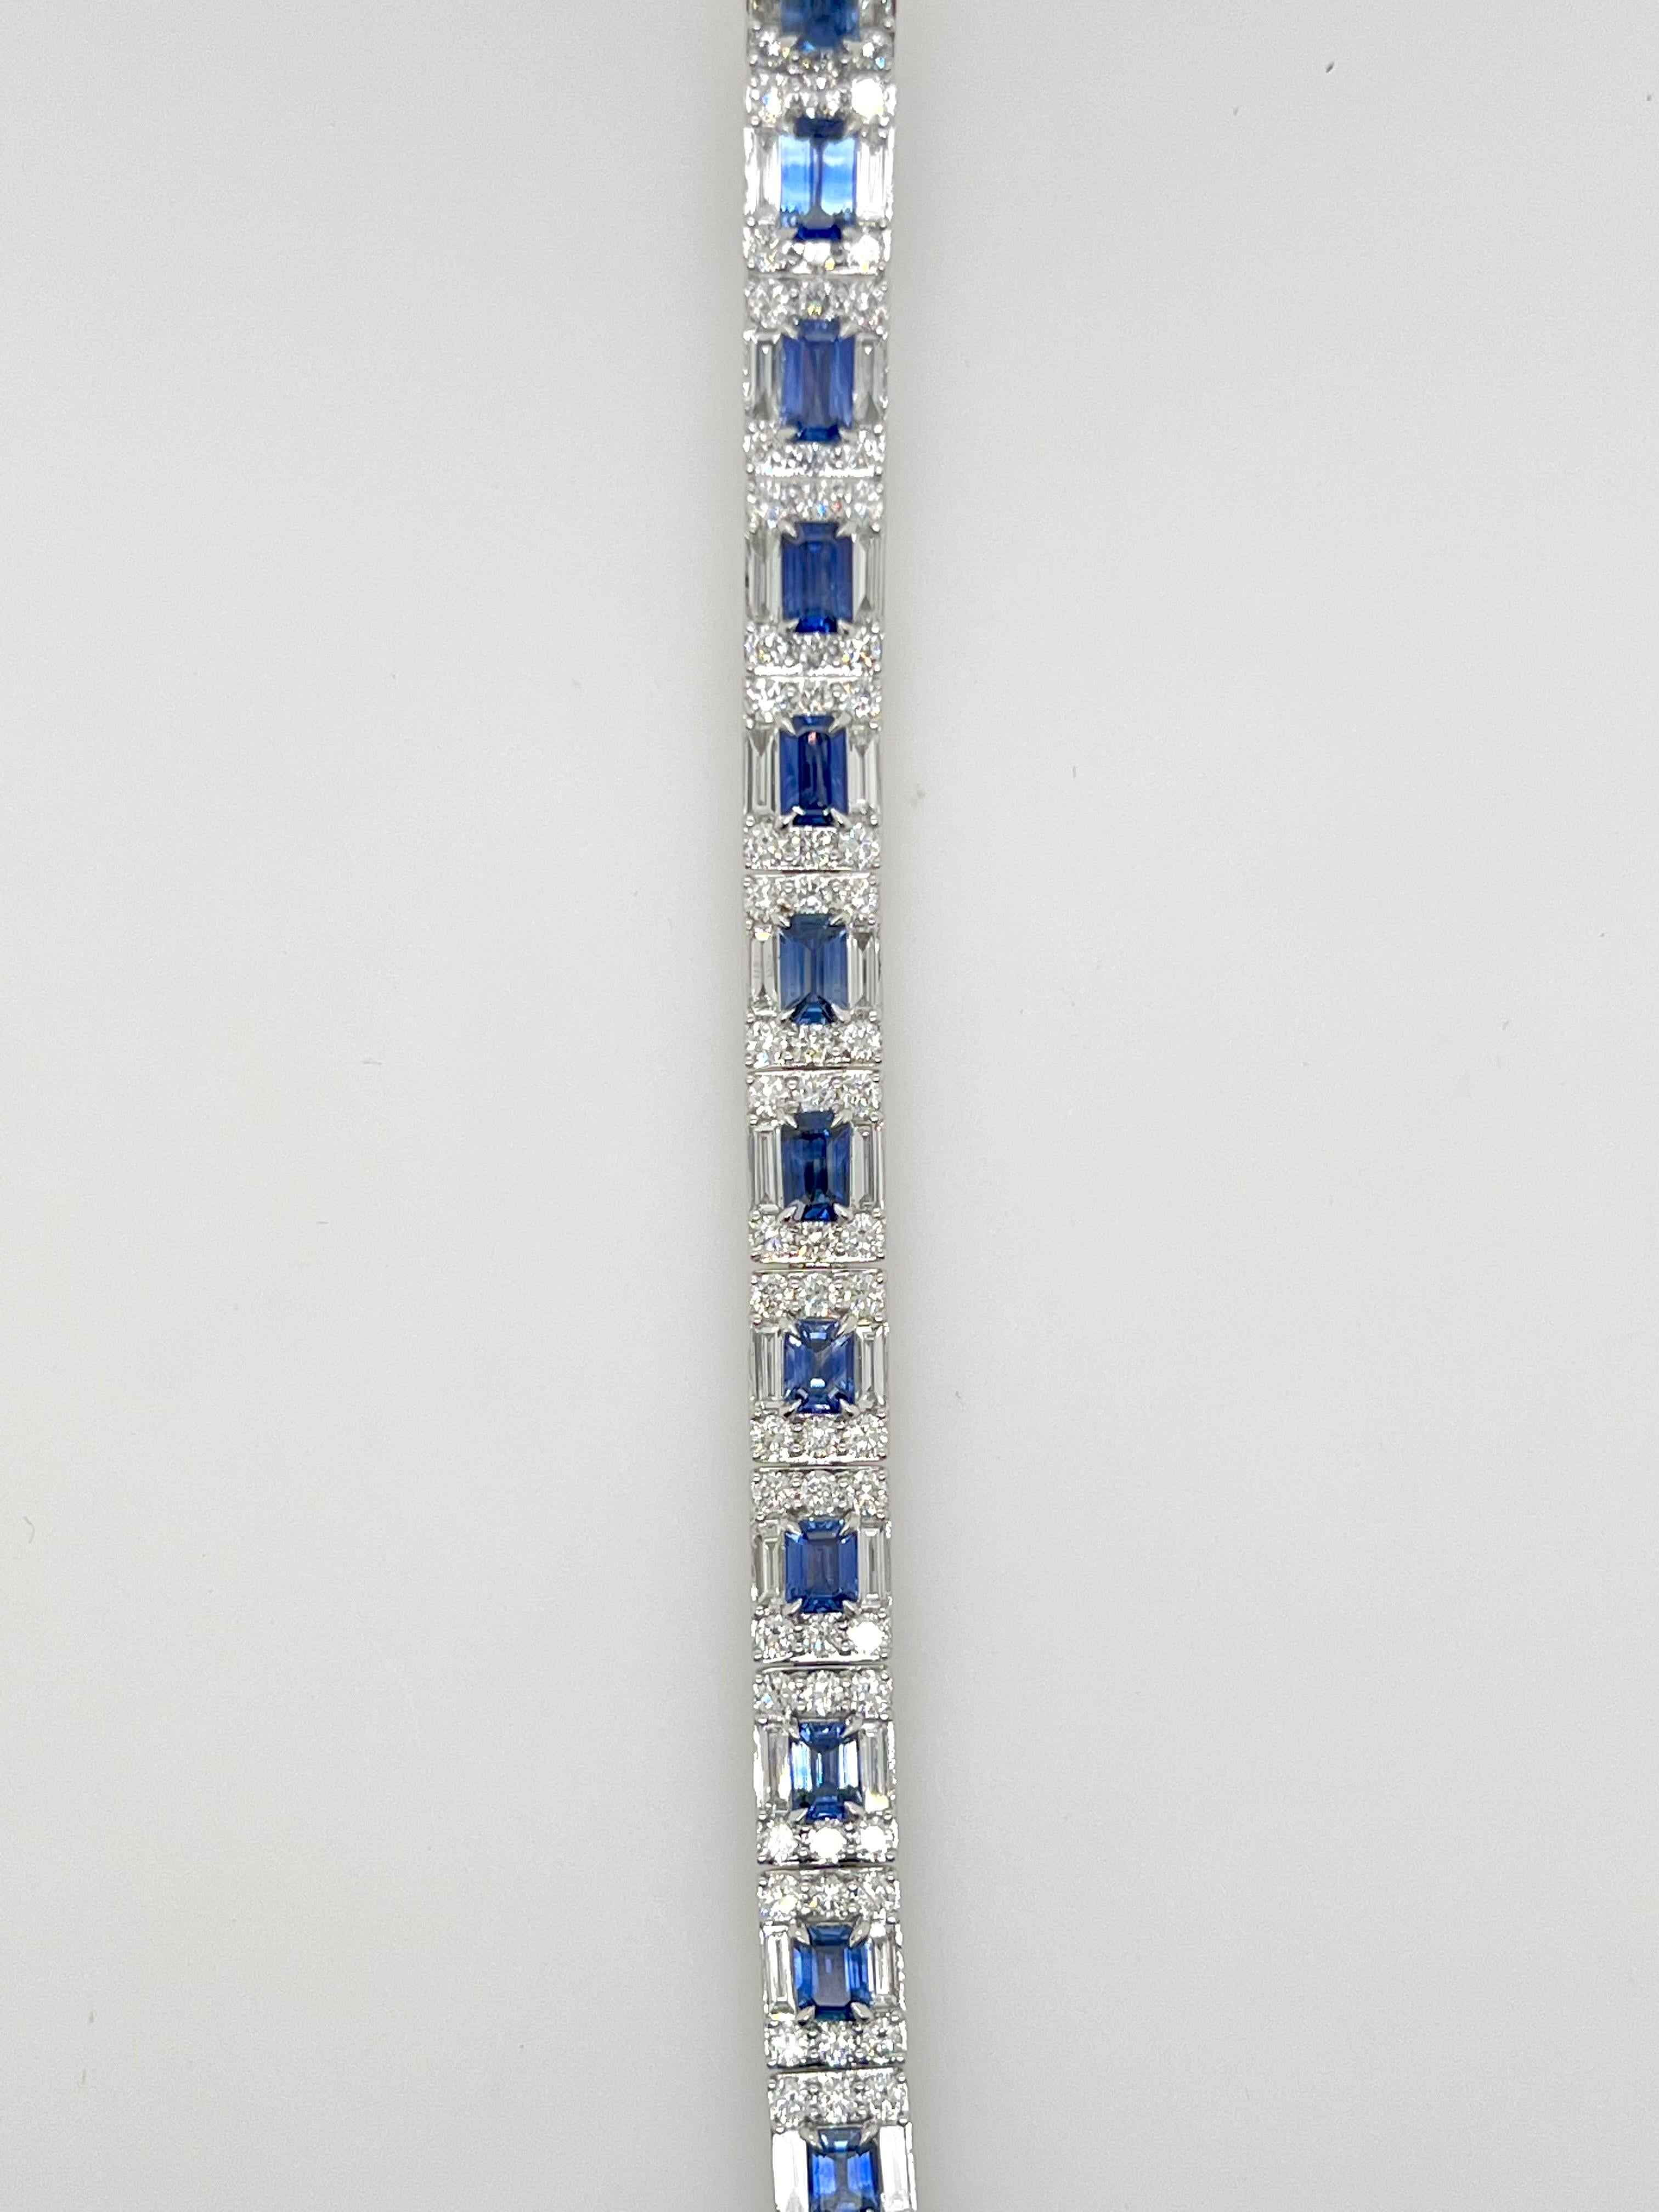 Absolutely gorgeous!  This handmade platinum bracelet is made up of emerald cut, blue sapphires and round brilliant and baguette diamonds.  A more sophisticated design, the versatile bracelet is perfect for smart causal or important events.  The